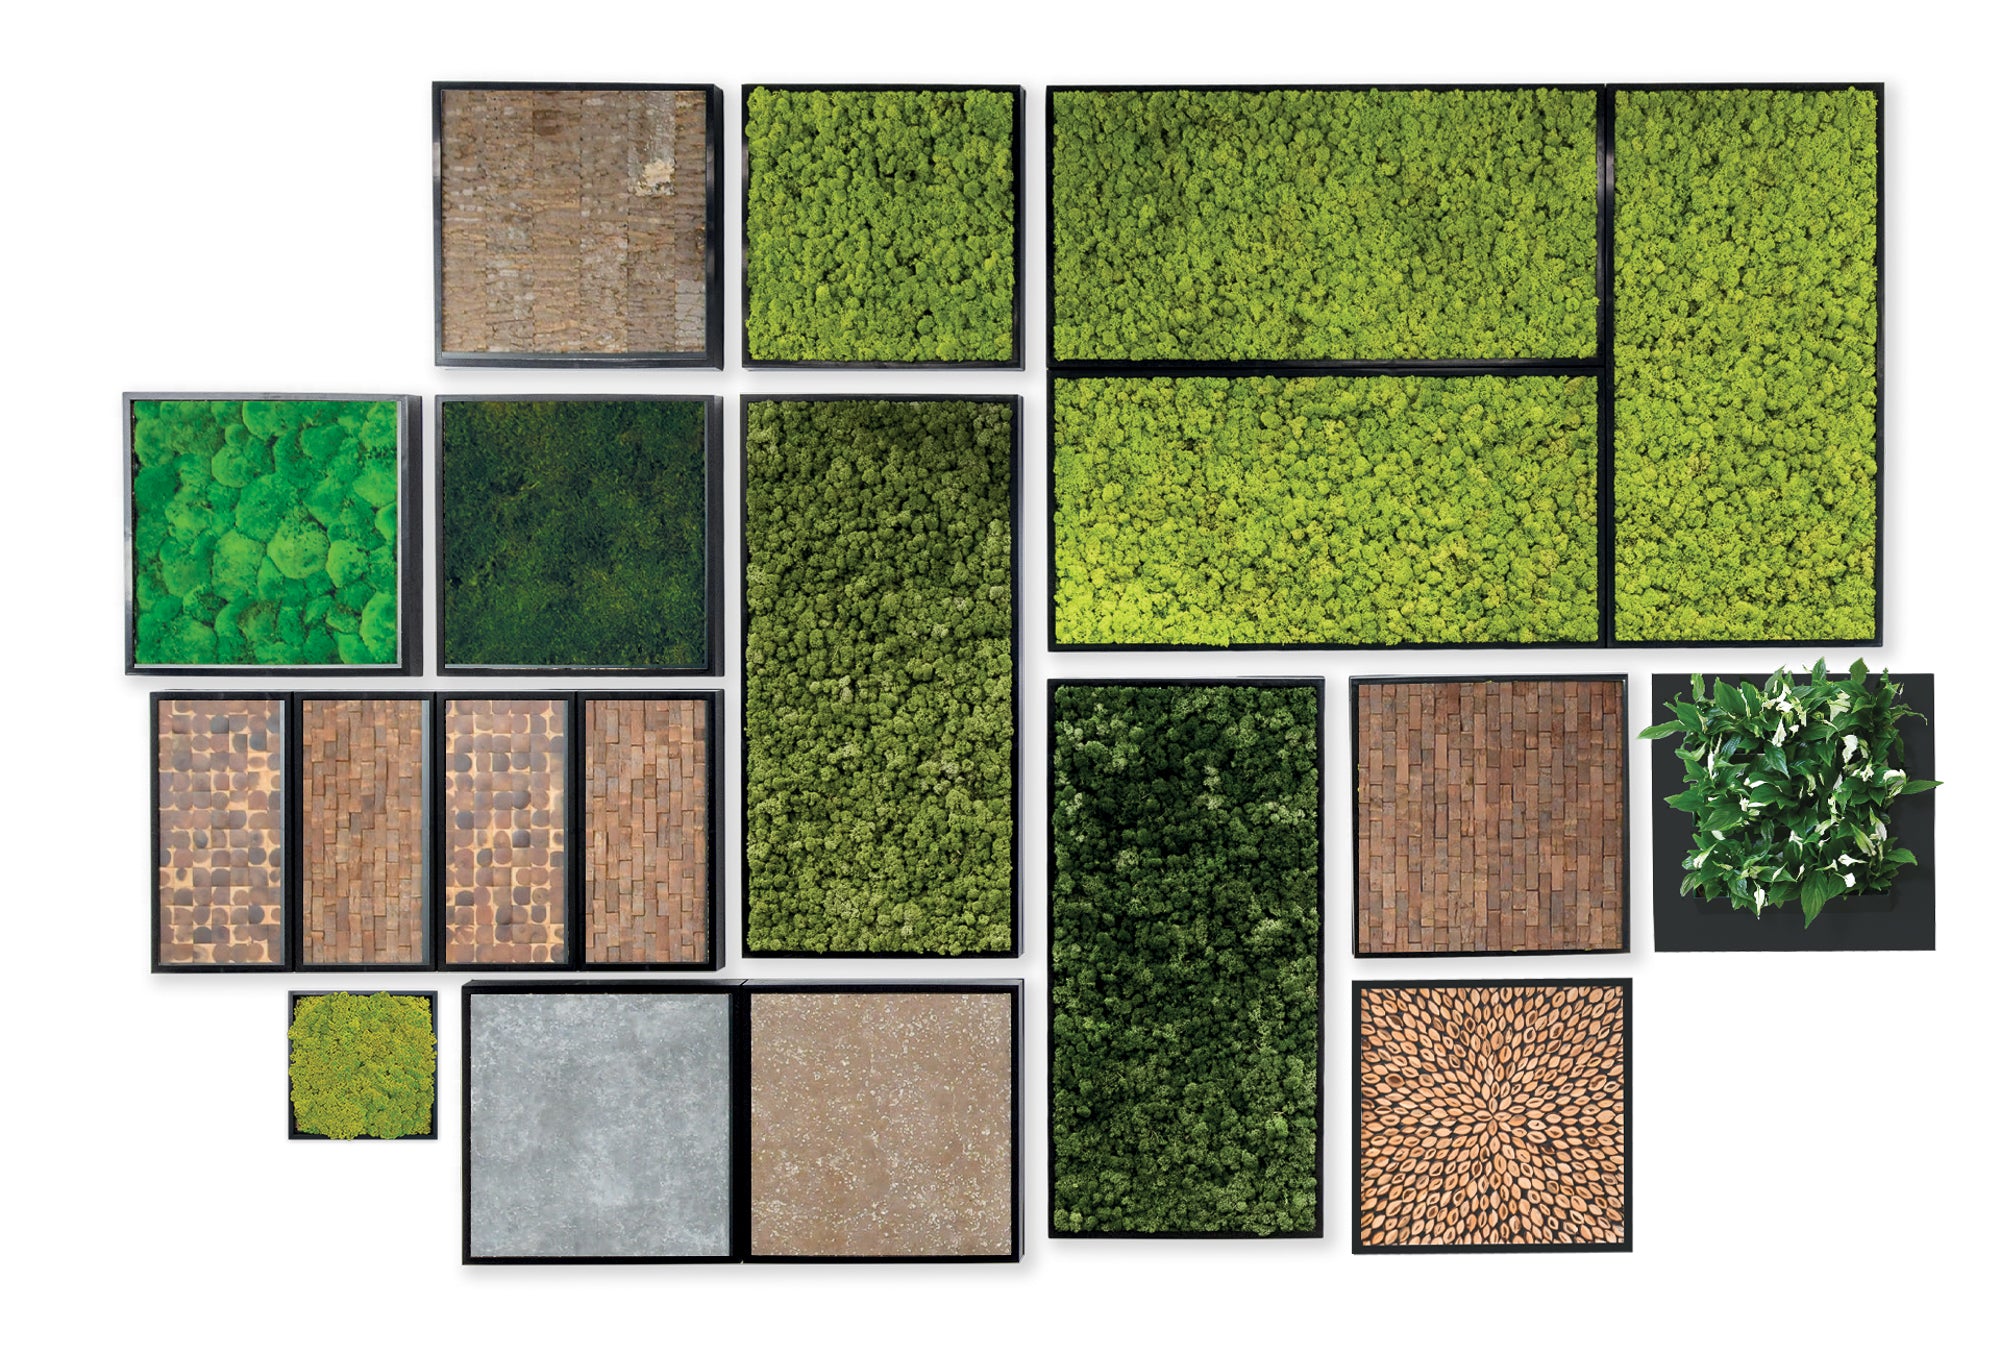 Bring the benefits of nature indoors with our sustainably harvested moss and bark inserts for green wall art that fits any space..